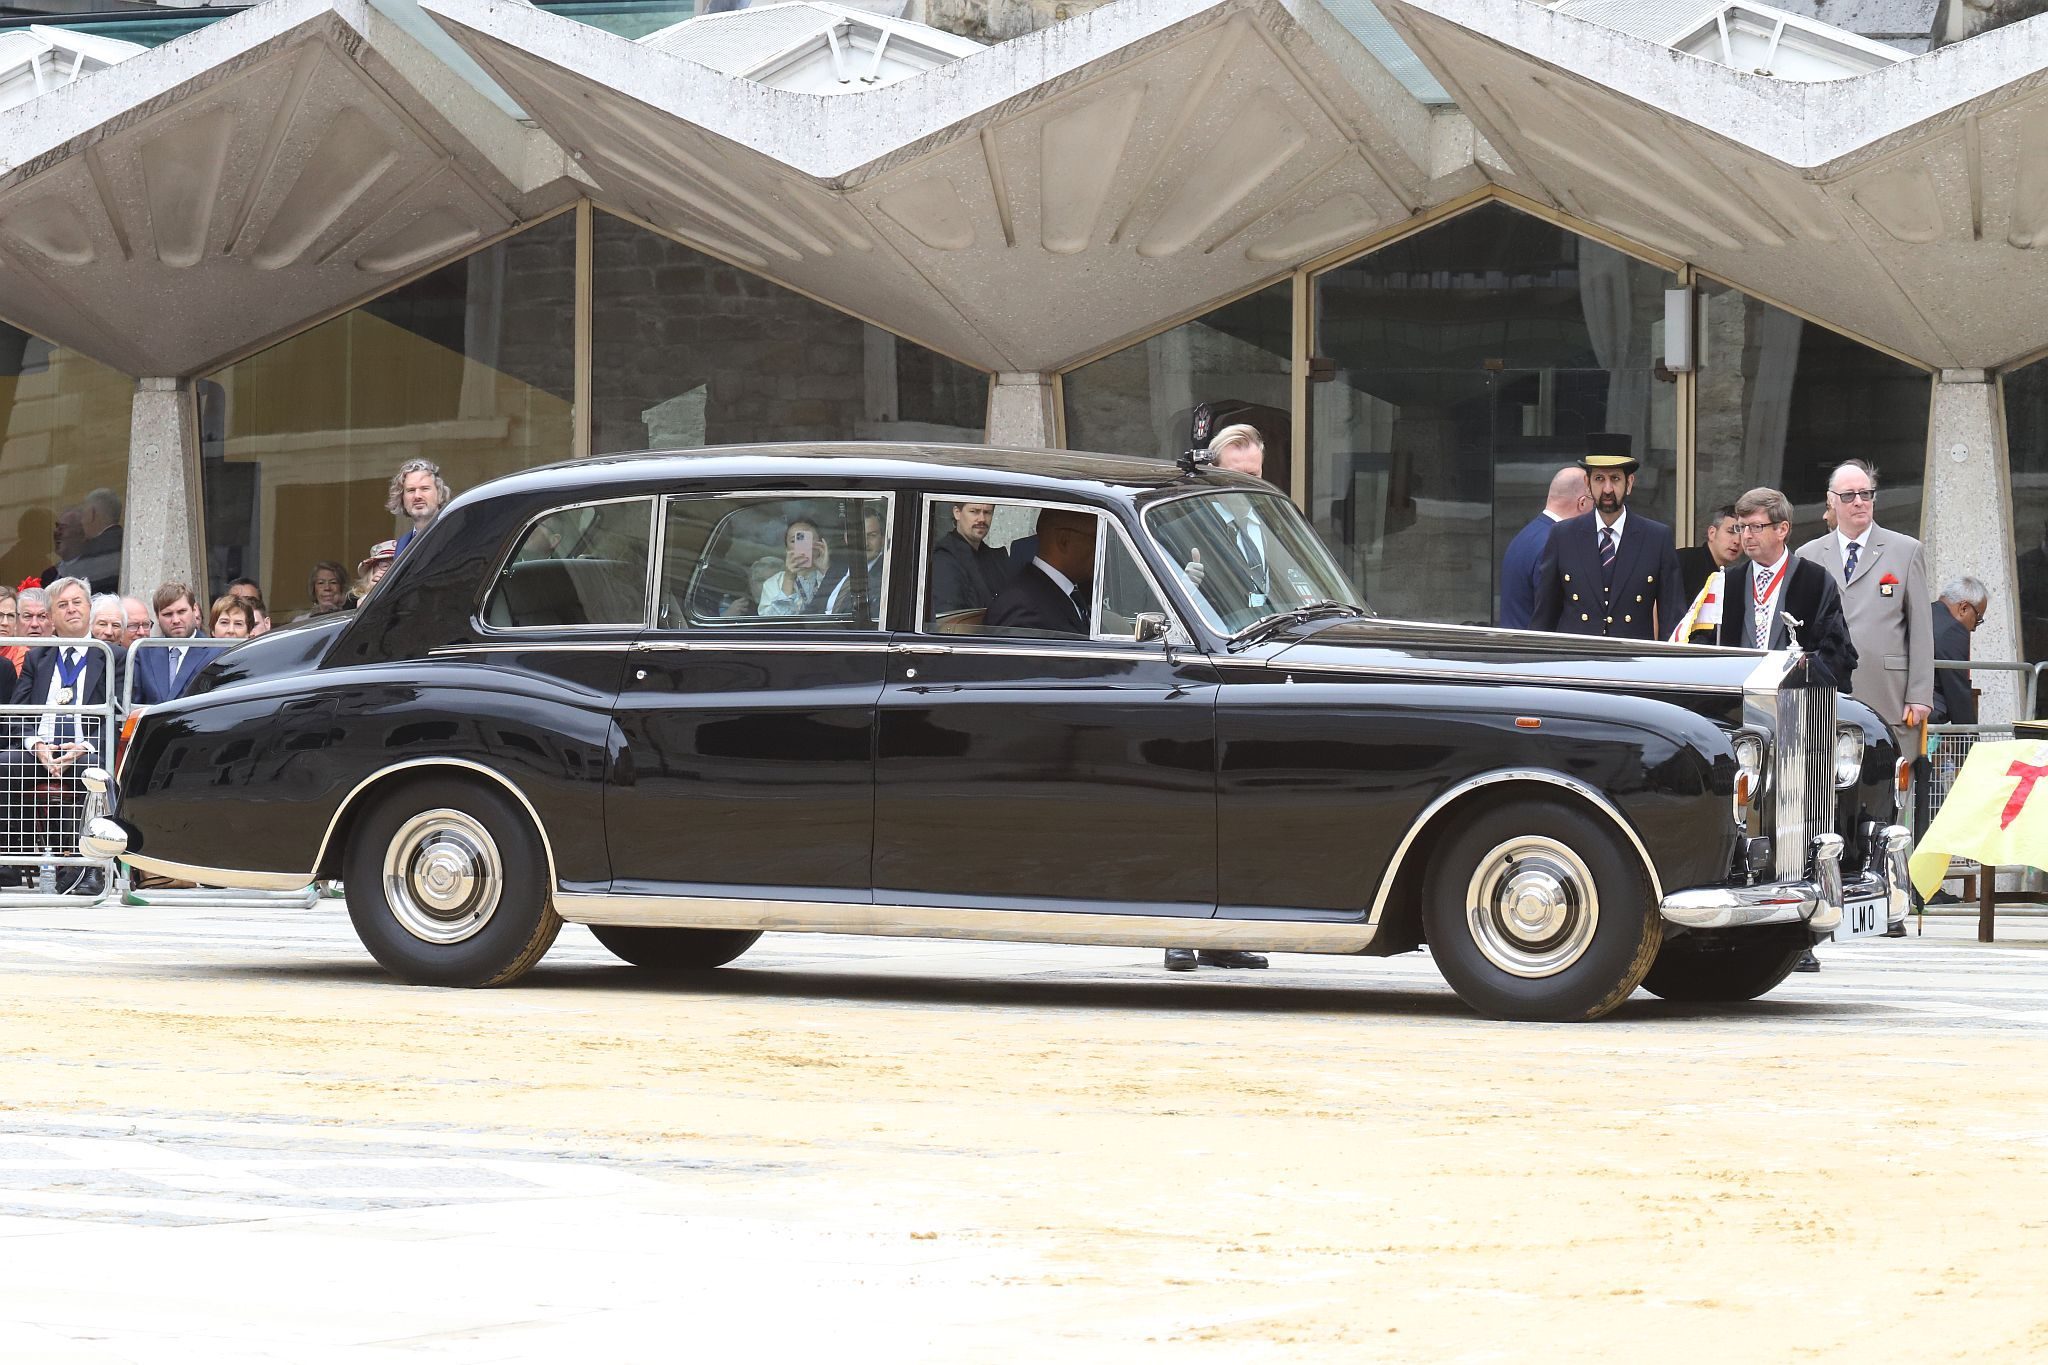 Roll Royce Phantom VI. City of London 2023 Cart Marking in Guildhall Yard on 22-Jul-2023. Hosted by the Worshipful Company of Carmen with the Lord Mayor of the City of London in attendance. Wooden plates on the vehicles are branded with hot irons to allow them to ply for trade in the Square Mile. Another of the City Livery Company's annual ceremonies.